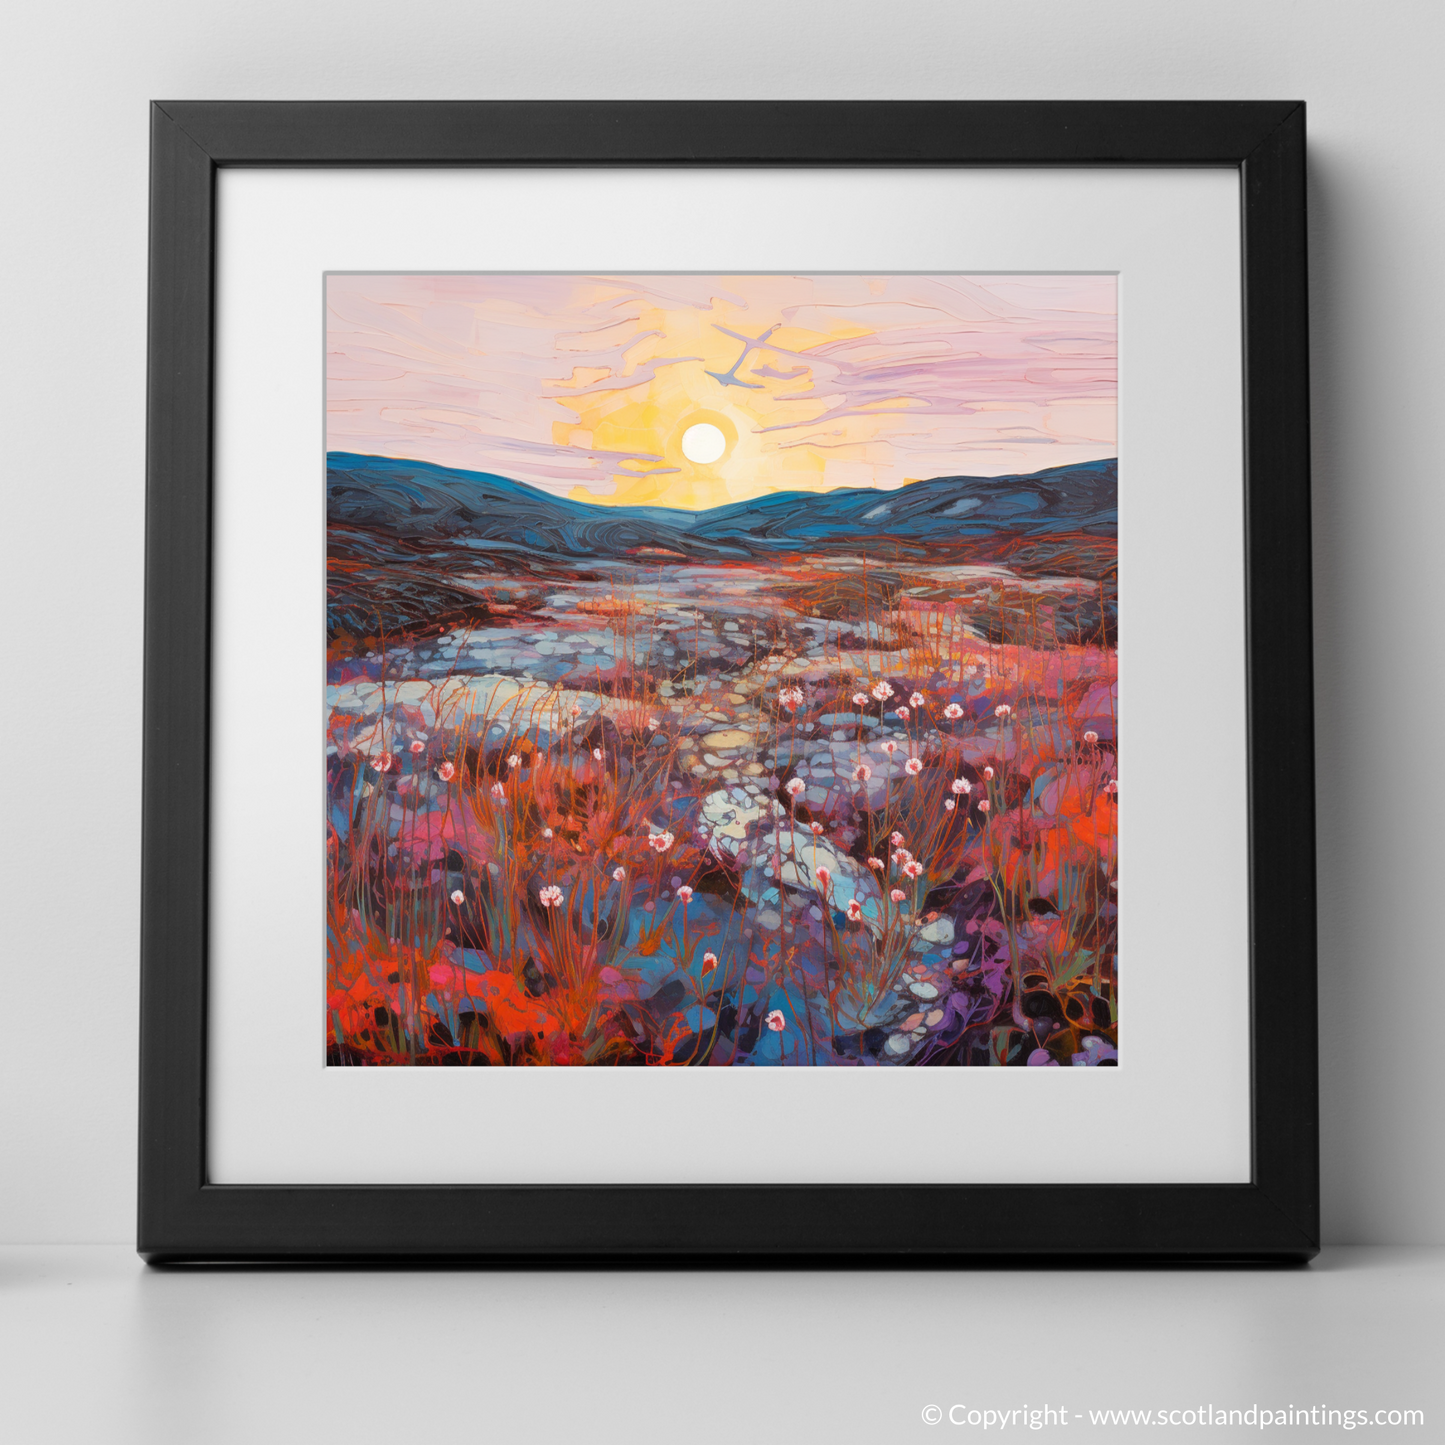 Art Print of Crowberry patches at dusk in Glencoe with a black frame